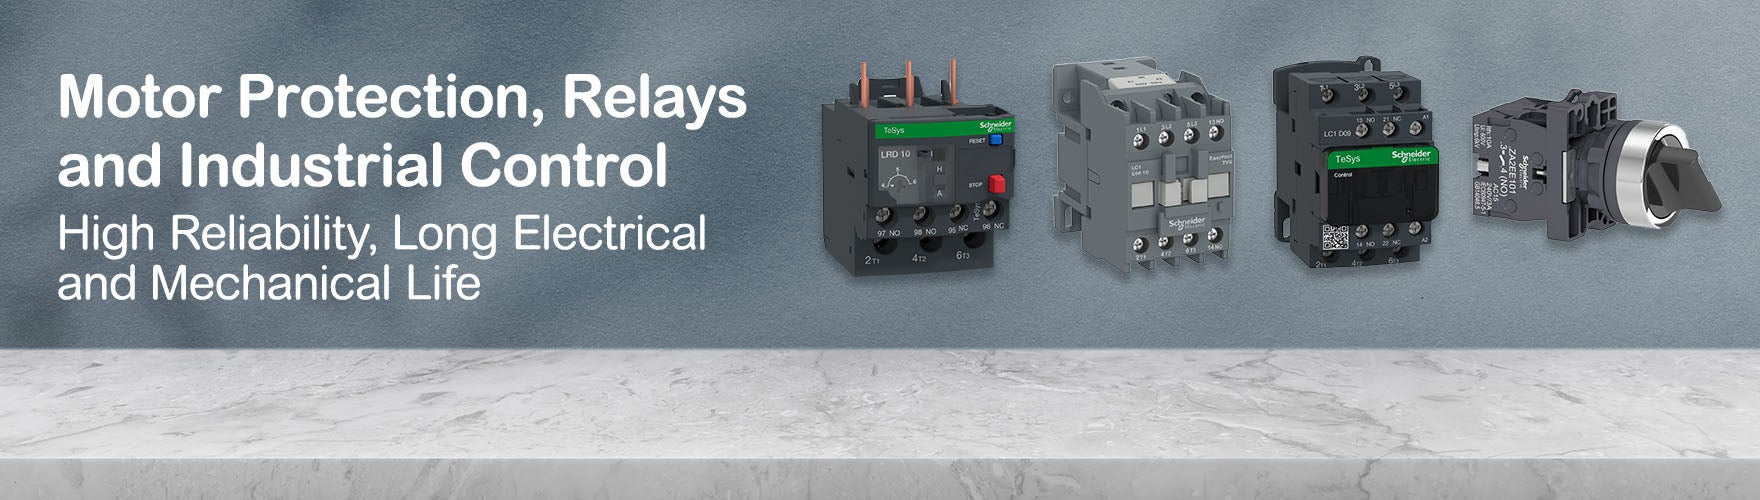 Motor Protection Relays and Industrial Control